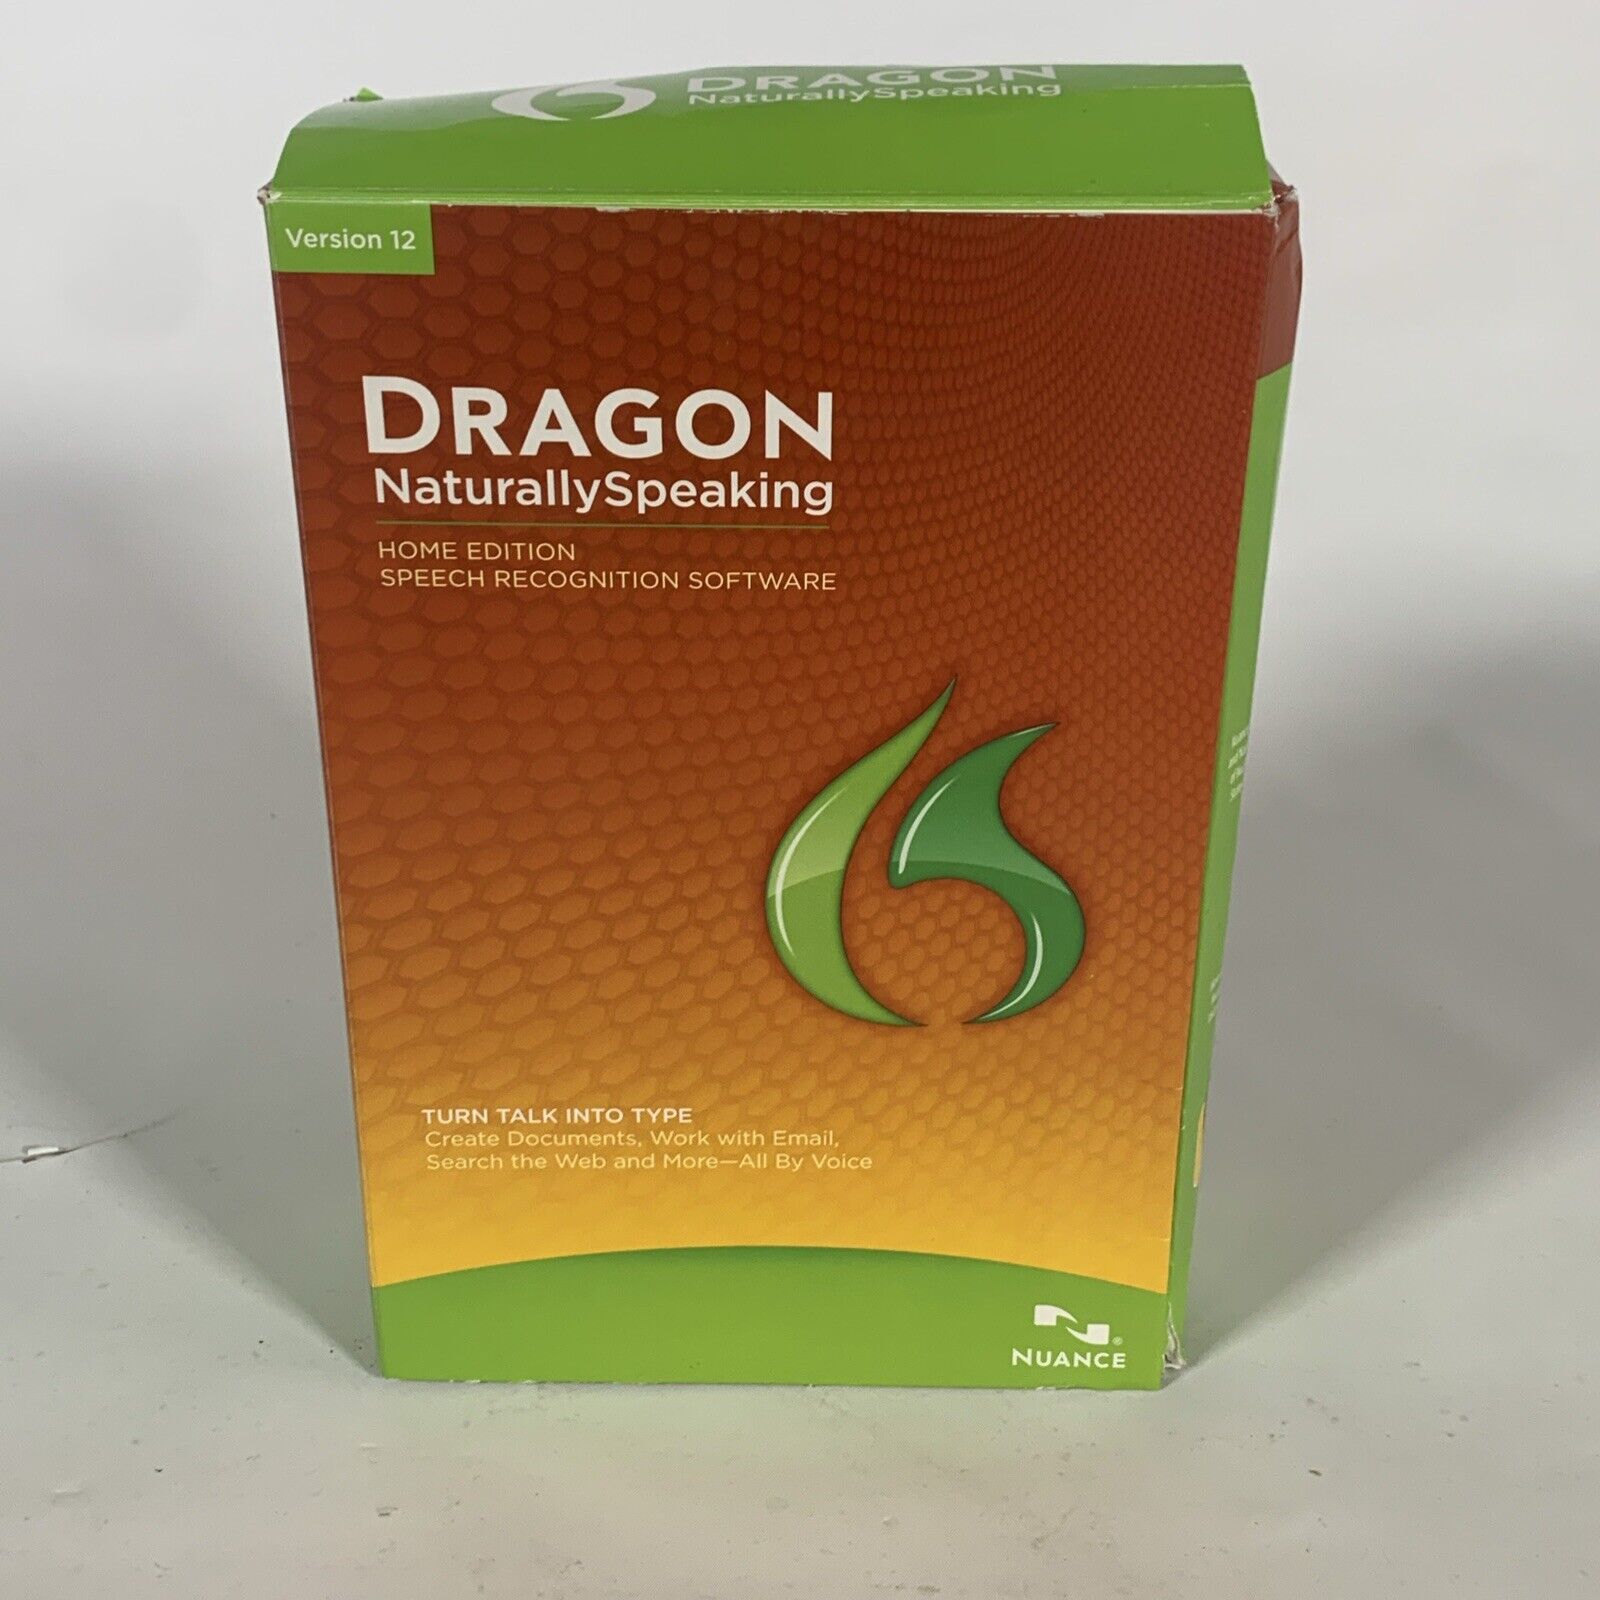 Dragon Naturally Speaking Home Version 12 Speech Recognition Software w/Head Set